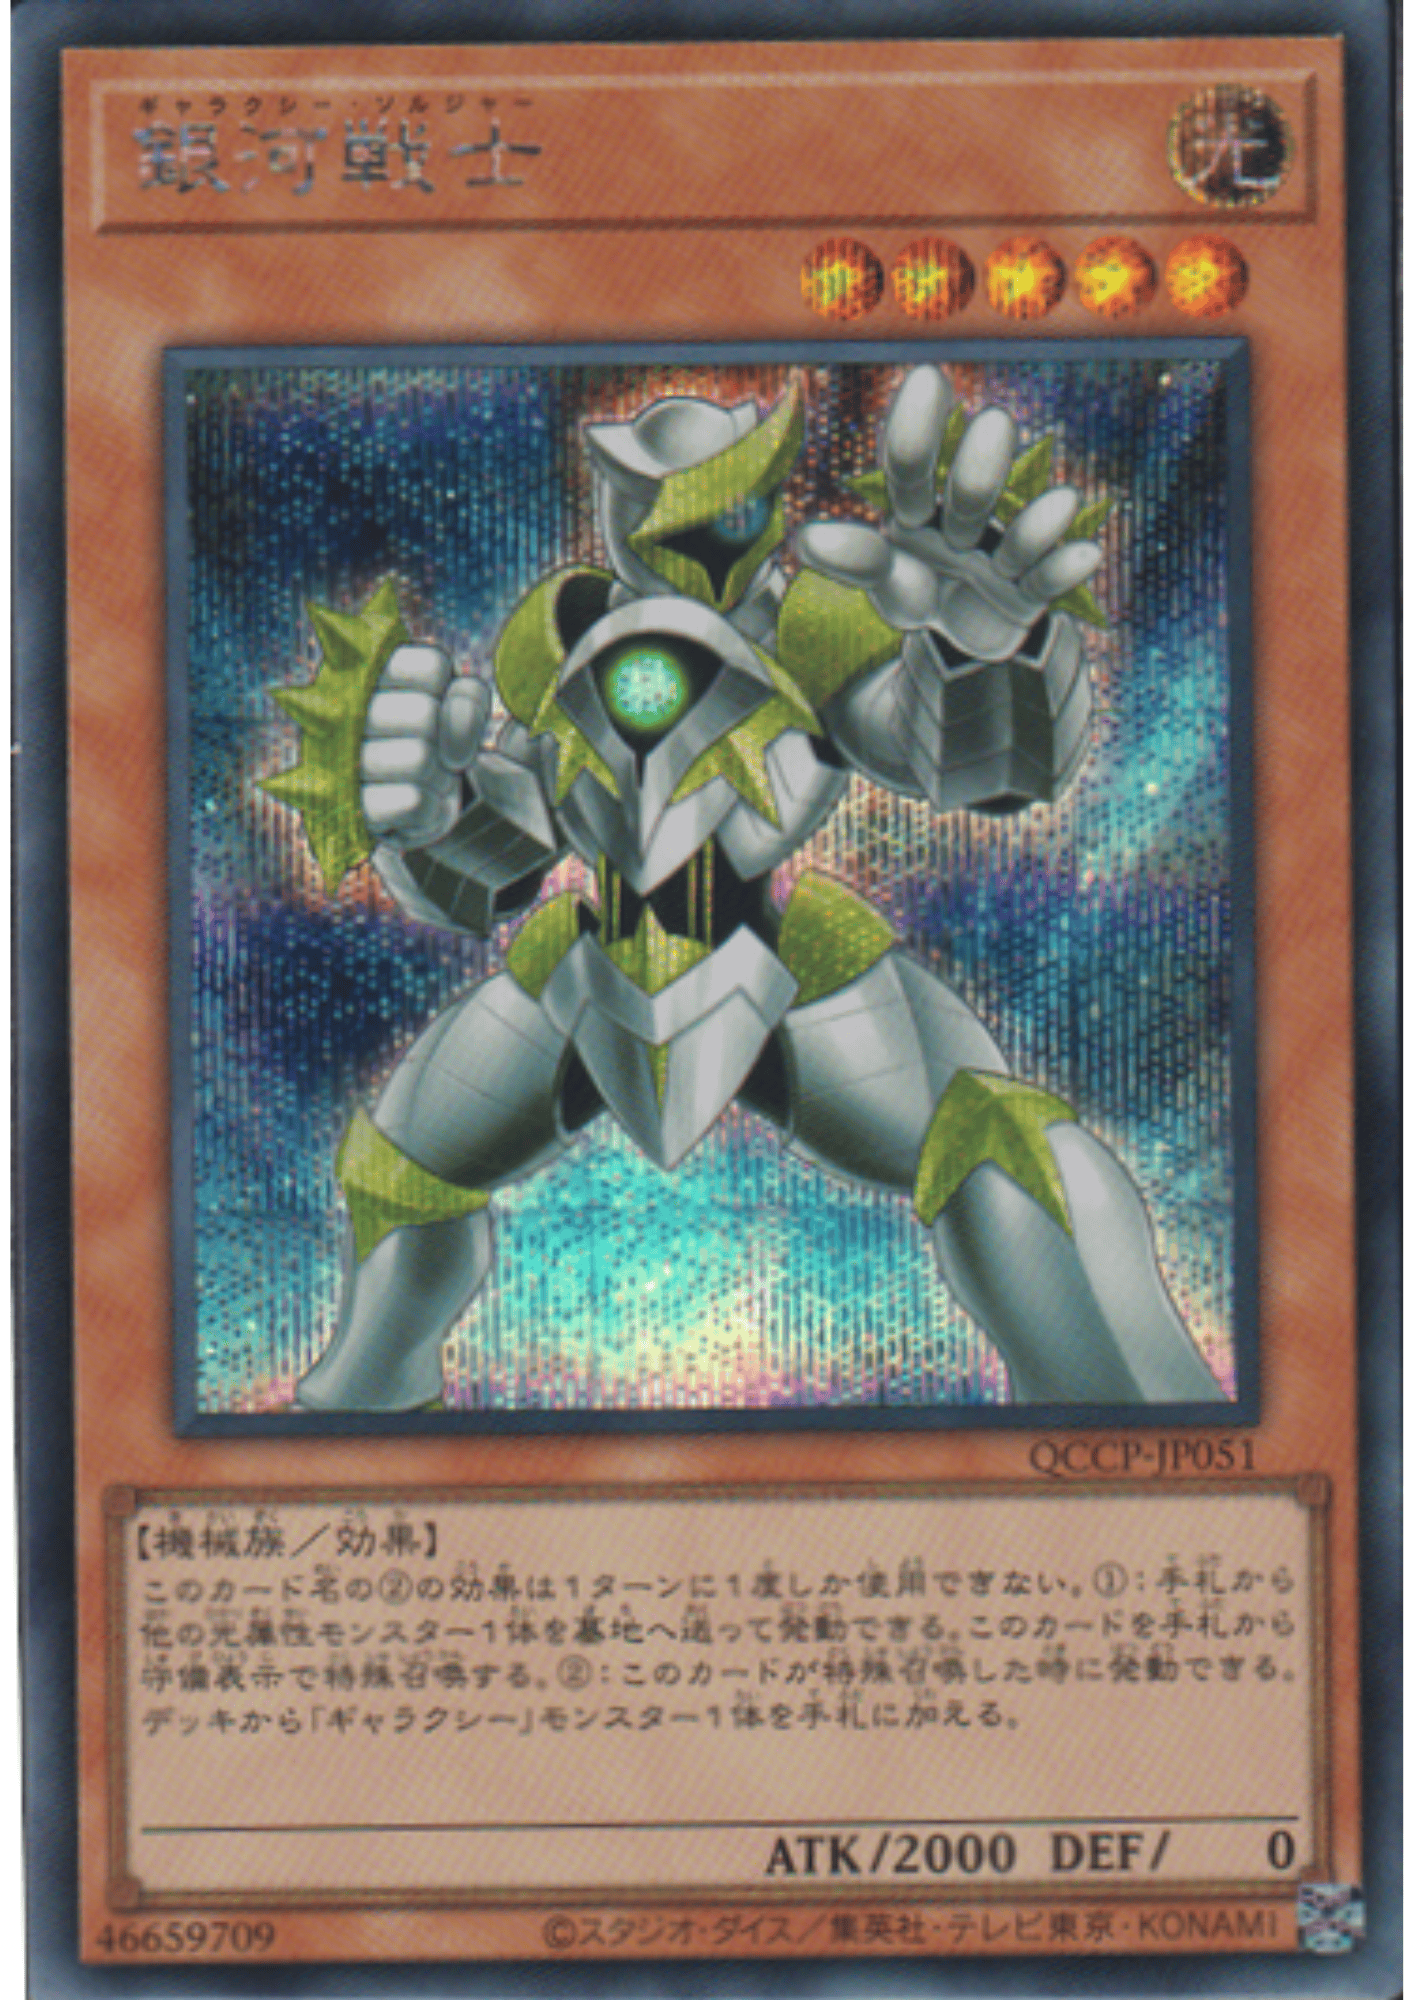 Galaxy Soldier QCCP-JP051 | Quarter Century Chronicle side:Pride